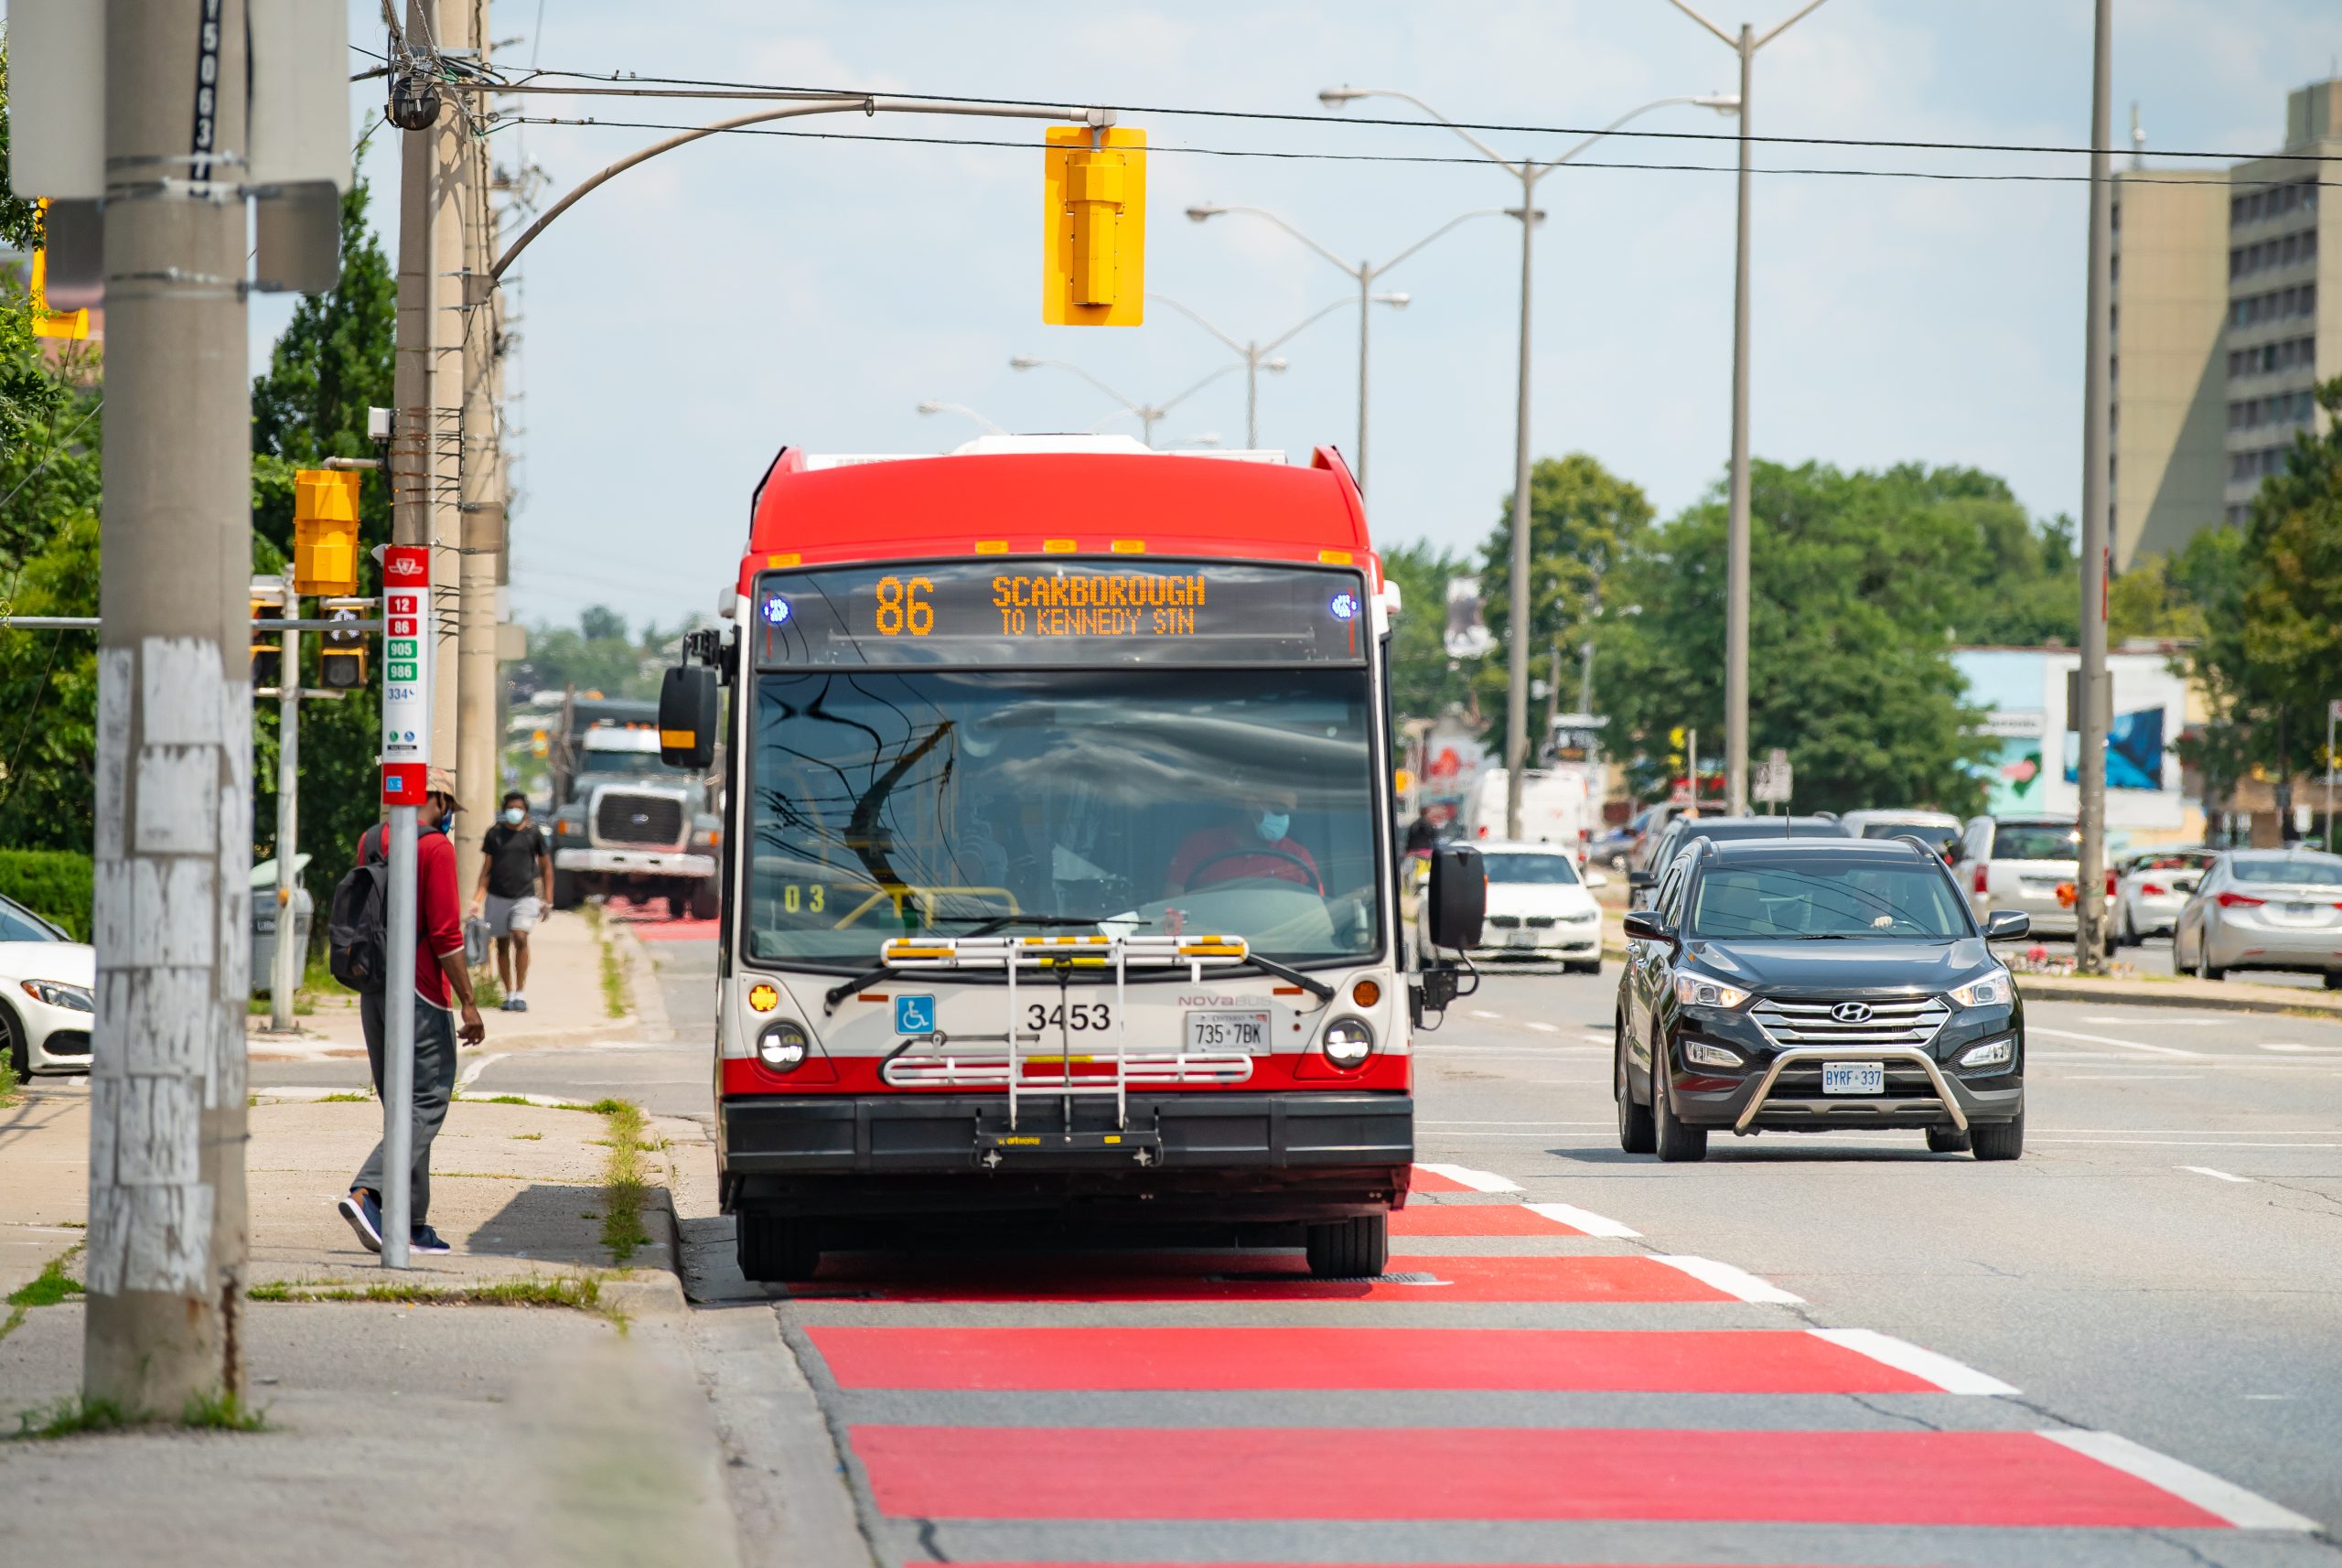 The 86 Scarborough bus arriving at a bus stop on a priority roadway..